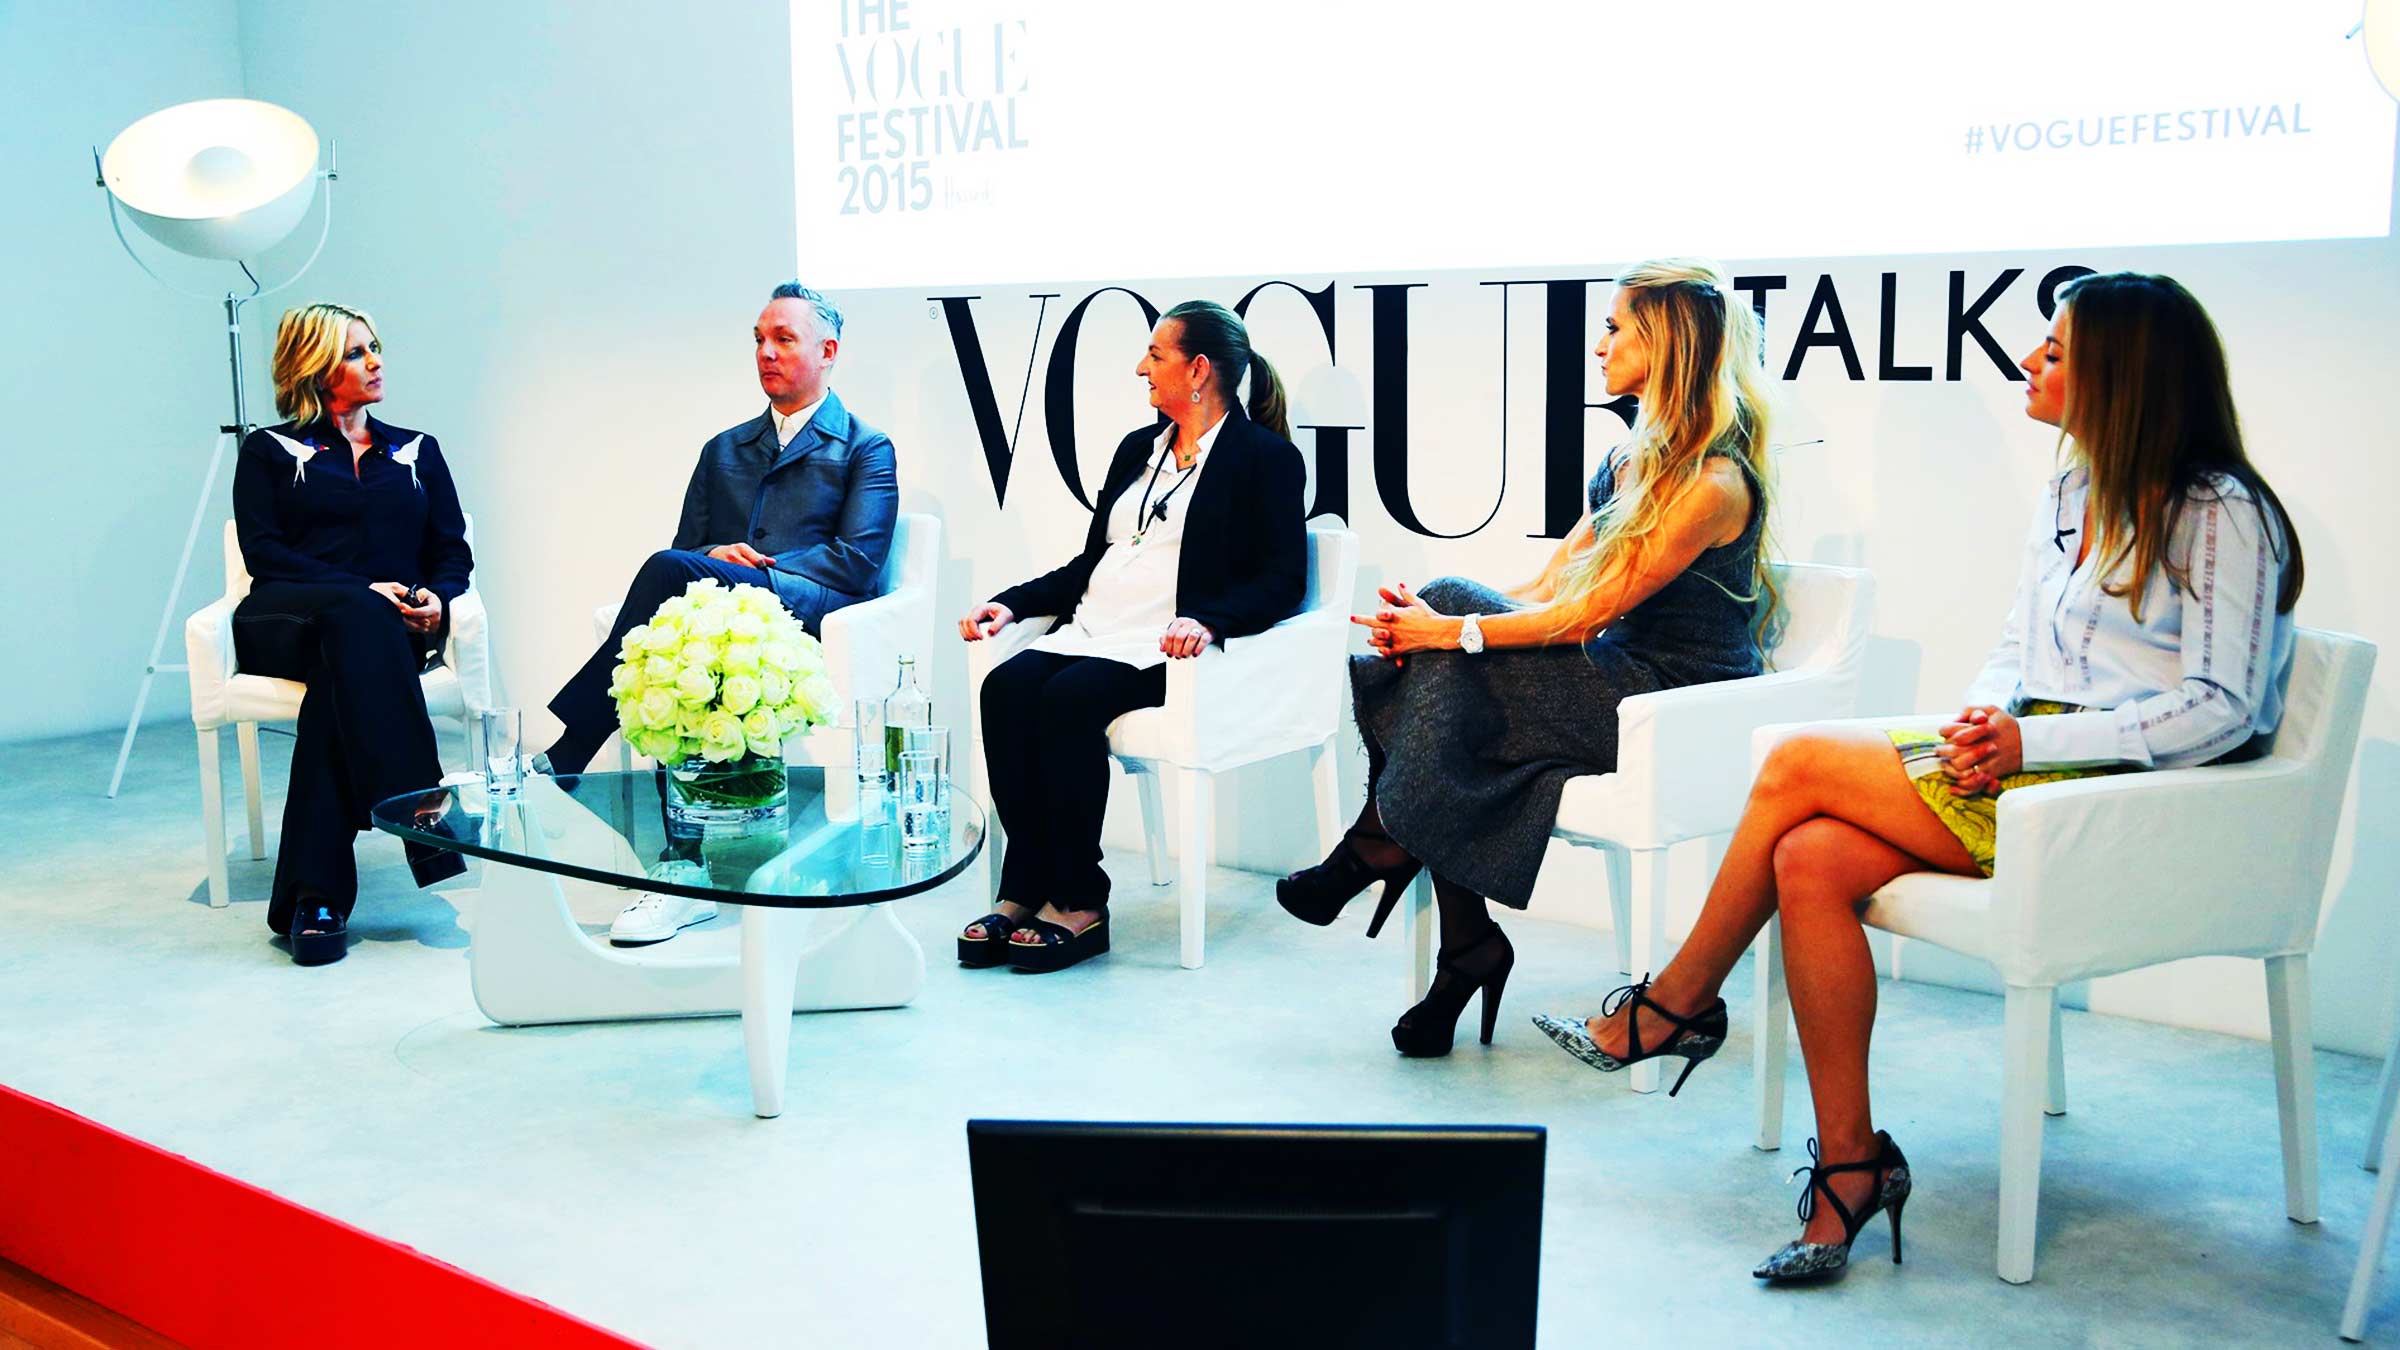 Panellists, including Moira Benigson, discuss dressing for success at Vogue Festival